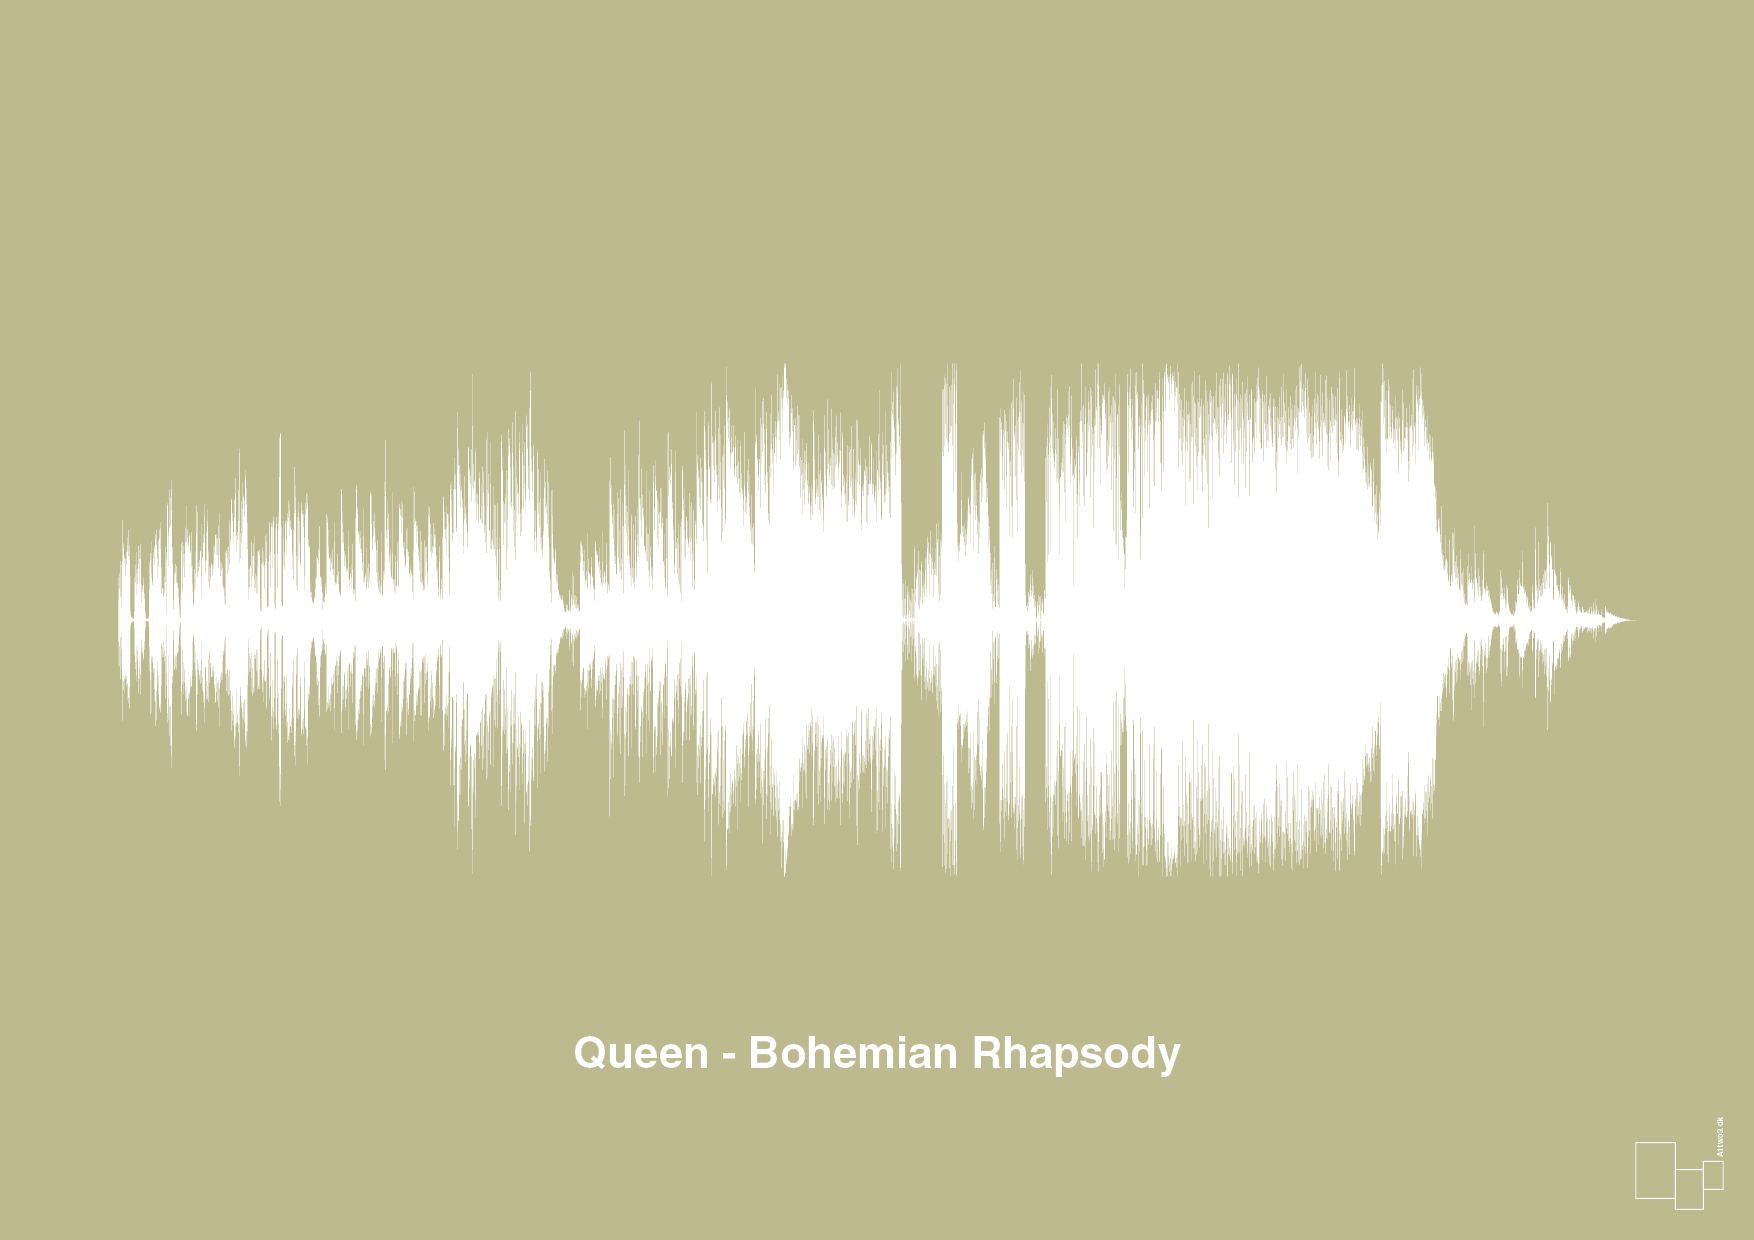 queen - bohemian rhapsody - Plakat med Musik i Back to Nature